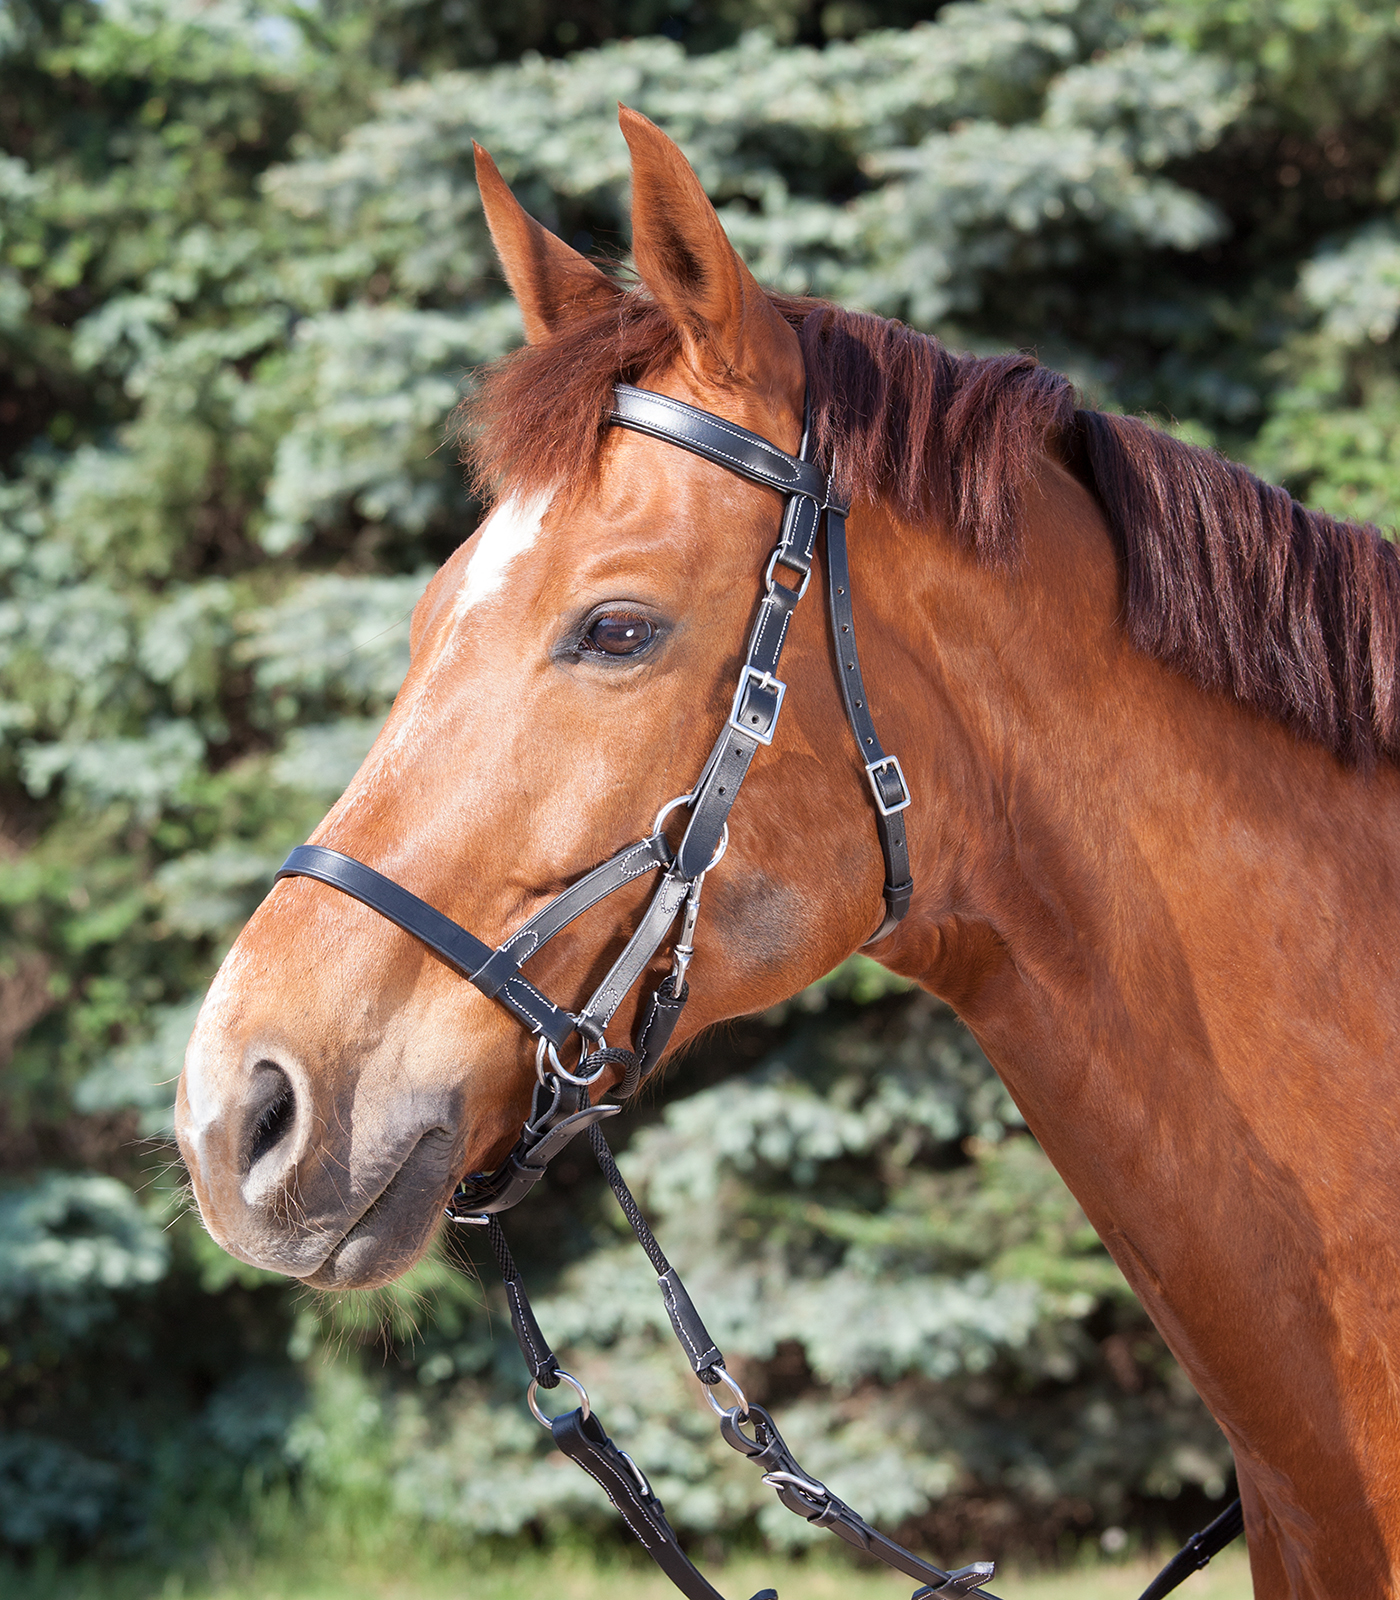 STAR Two Bitless Bridle black